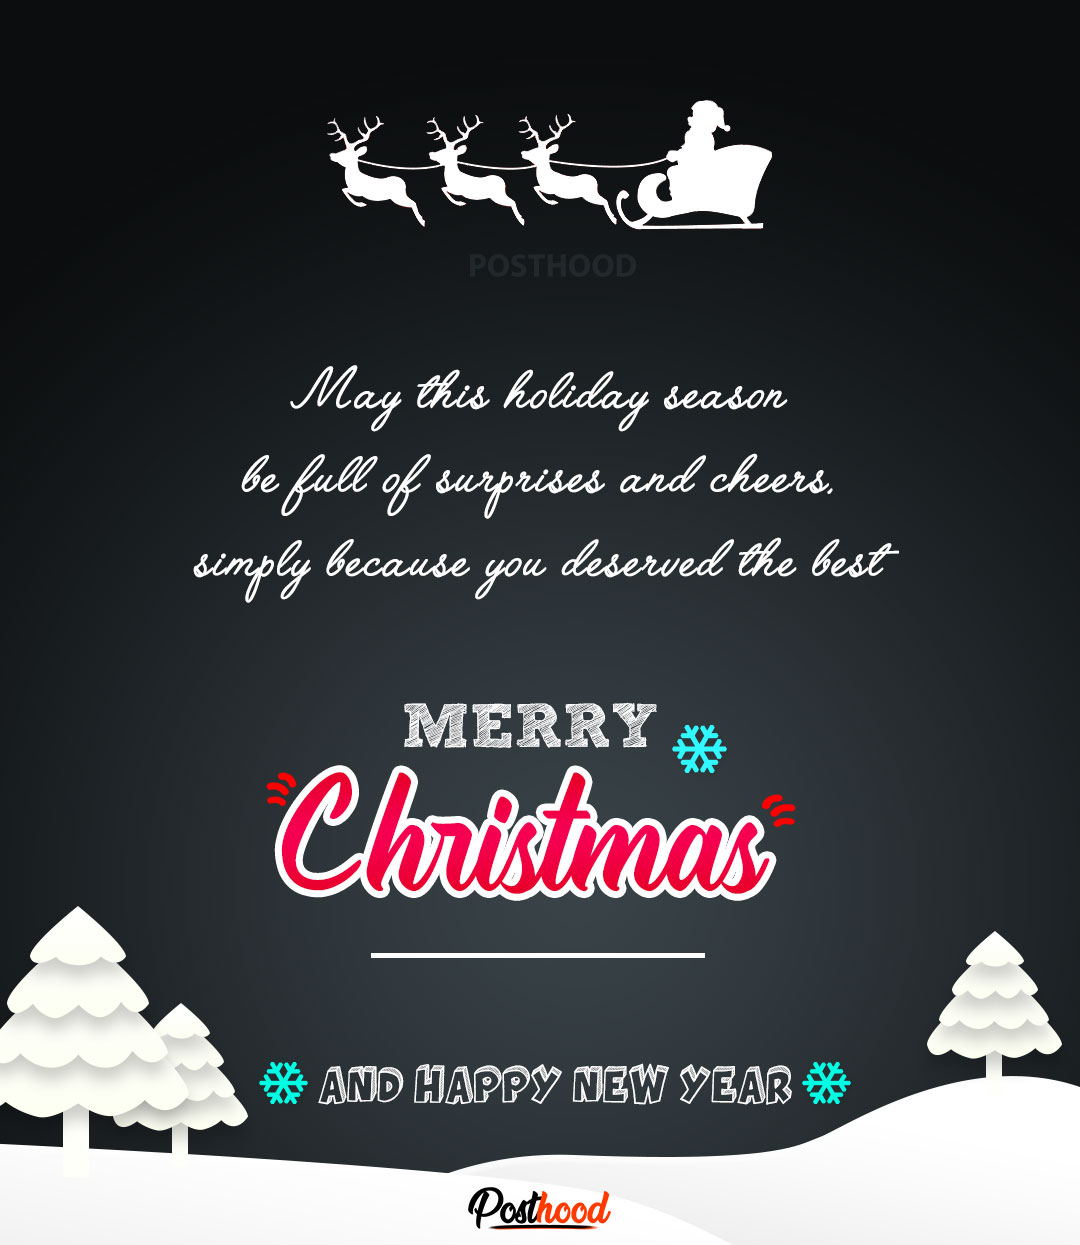 Find 25 heartwarming Christmas wishes for your family and friends. These cute Christmas quotes will pour your heart out for them. Merry Christmas and Happy New Year!!